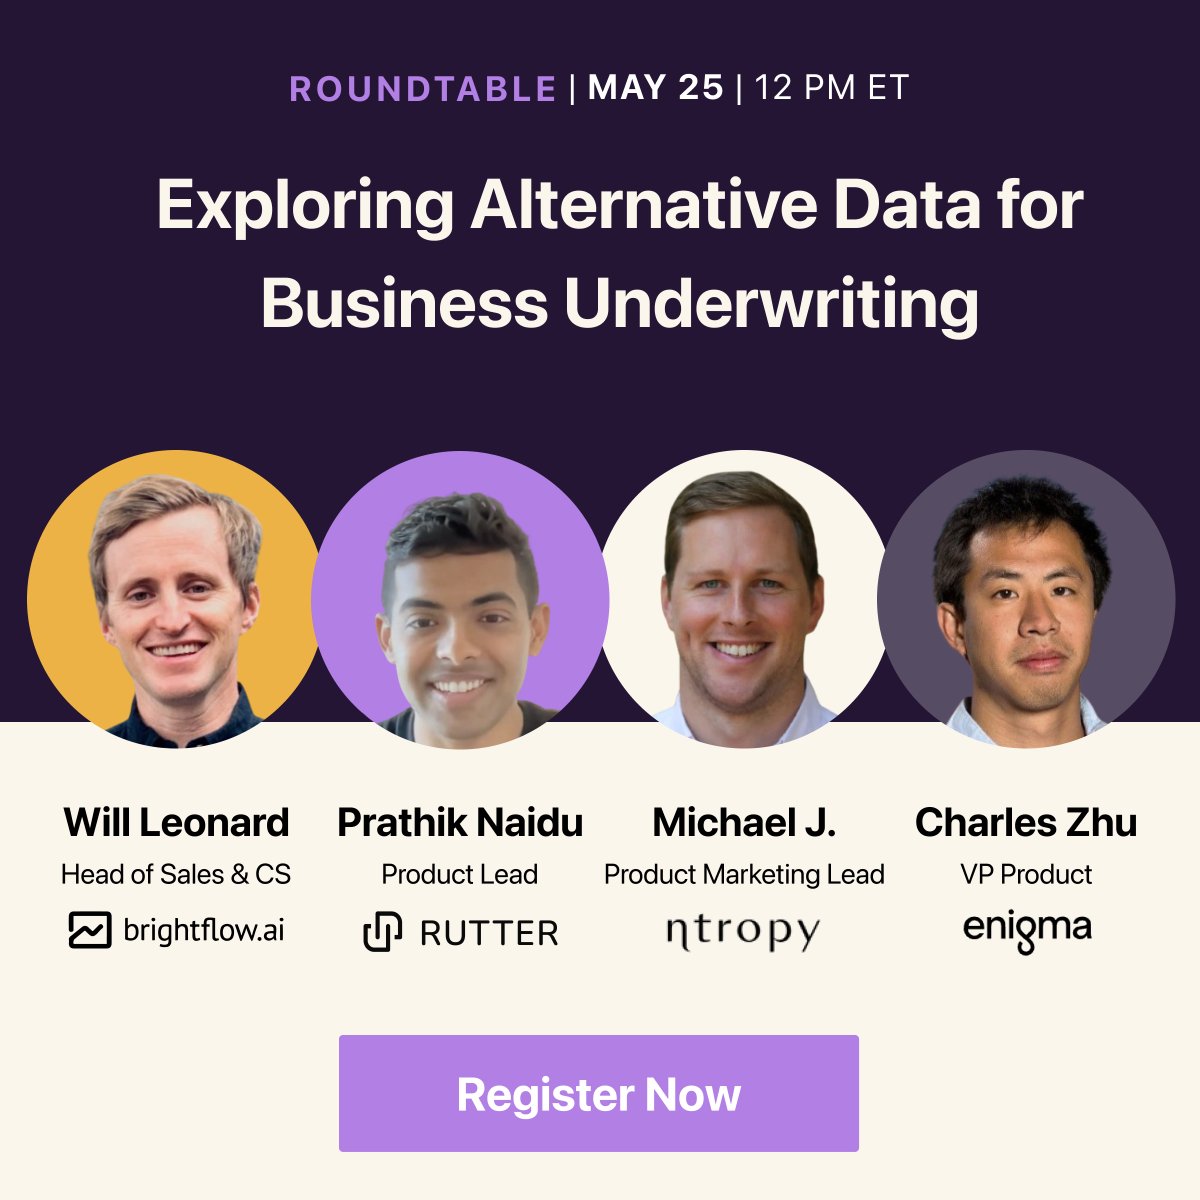 On Thursday, May 25 at noon ET our VP of Product at Enigma, Charles Zhu, will join @RutterAPI , @brightflow_ai and @ntropy_dev for a roundtable. We'll explore the role of alternative data in enhancing risk assessment accuracy. Register here: bit.ly/432OxUz